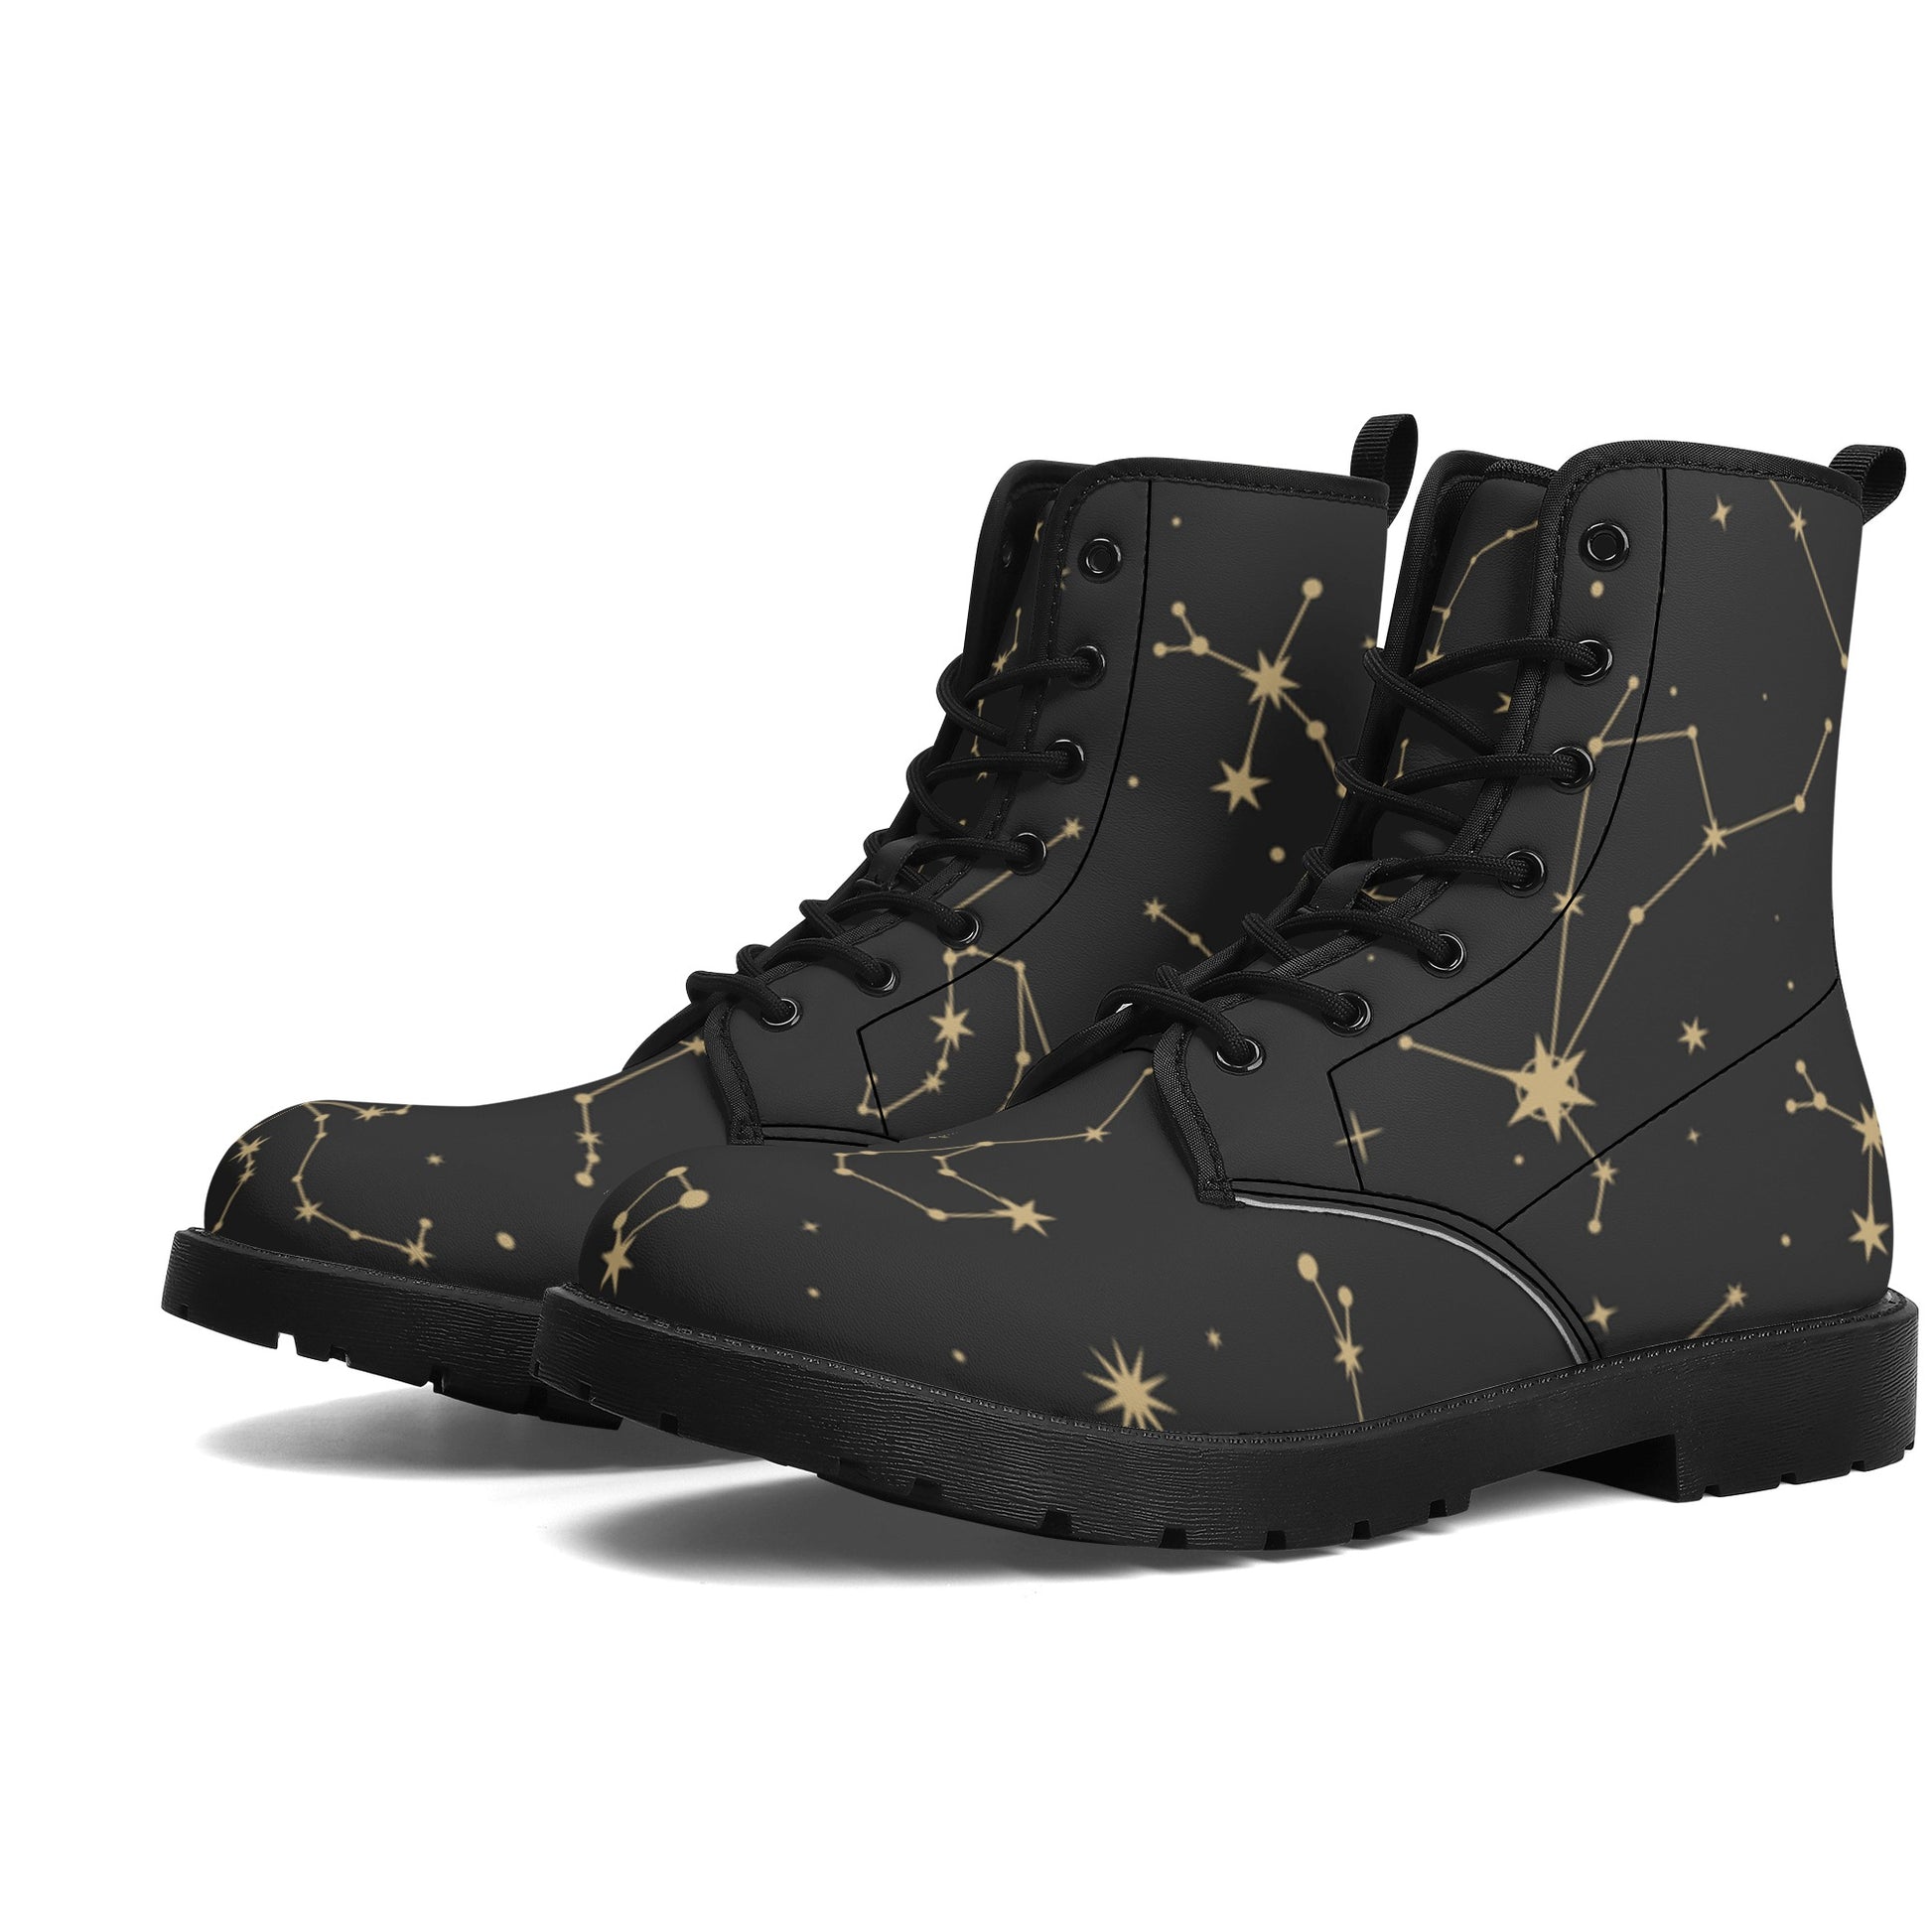 Constellation Women Leather Boots, Stars Space Vegan Lace Up Shoes Hiking Festival Black Ankle Combat Work Winter Waterproof Custom Ladies Starcove Fashion